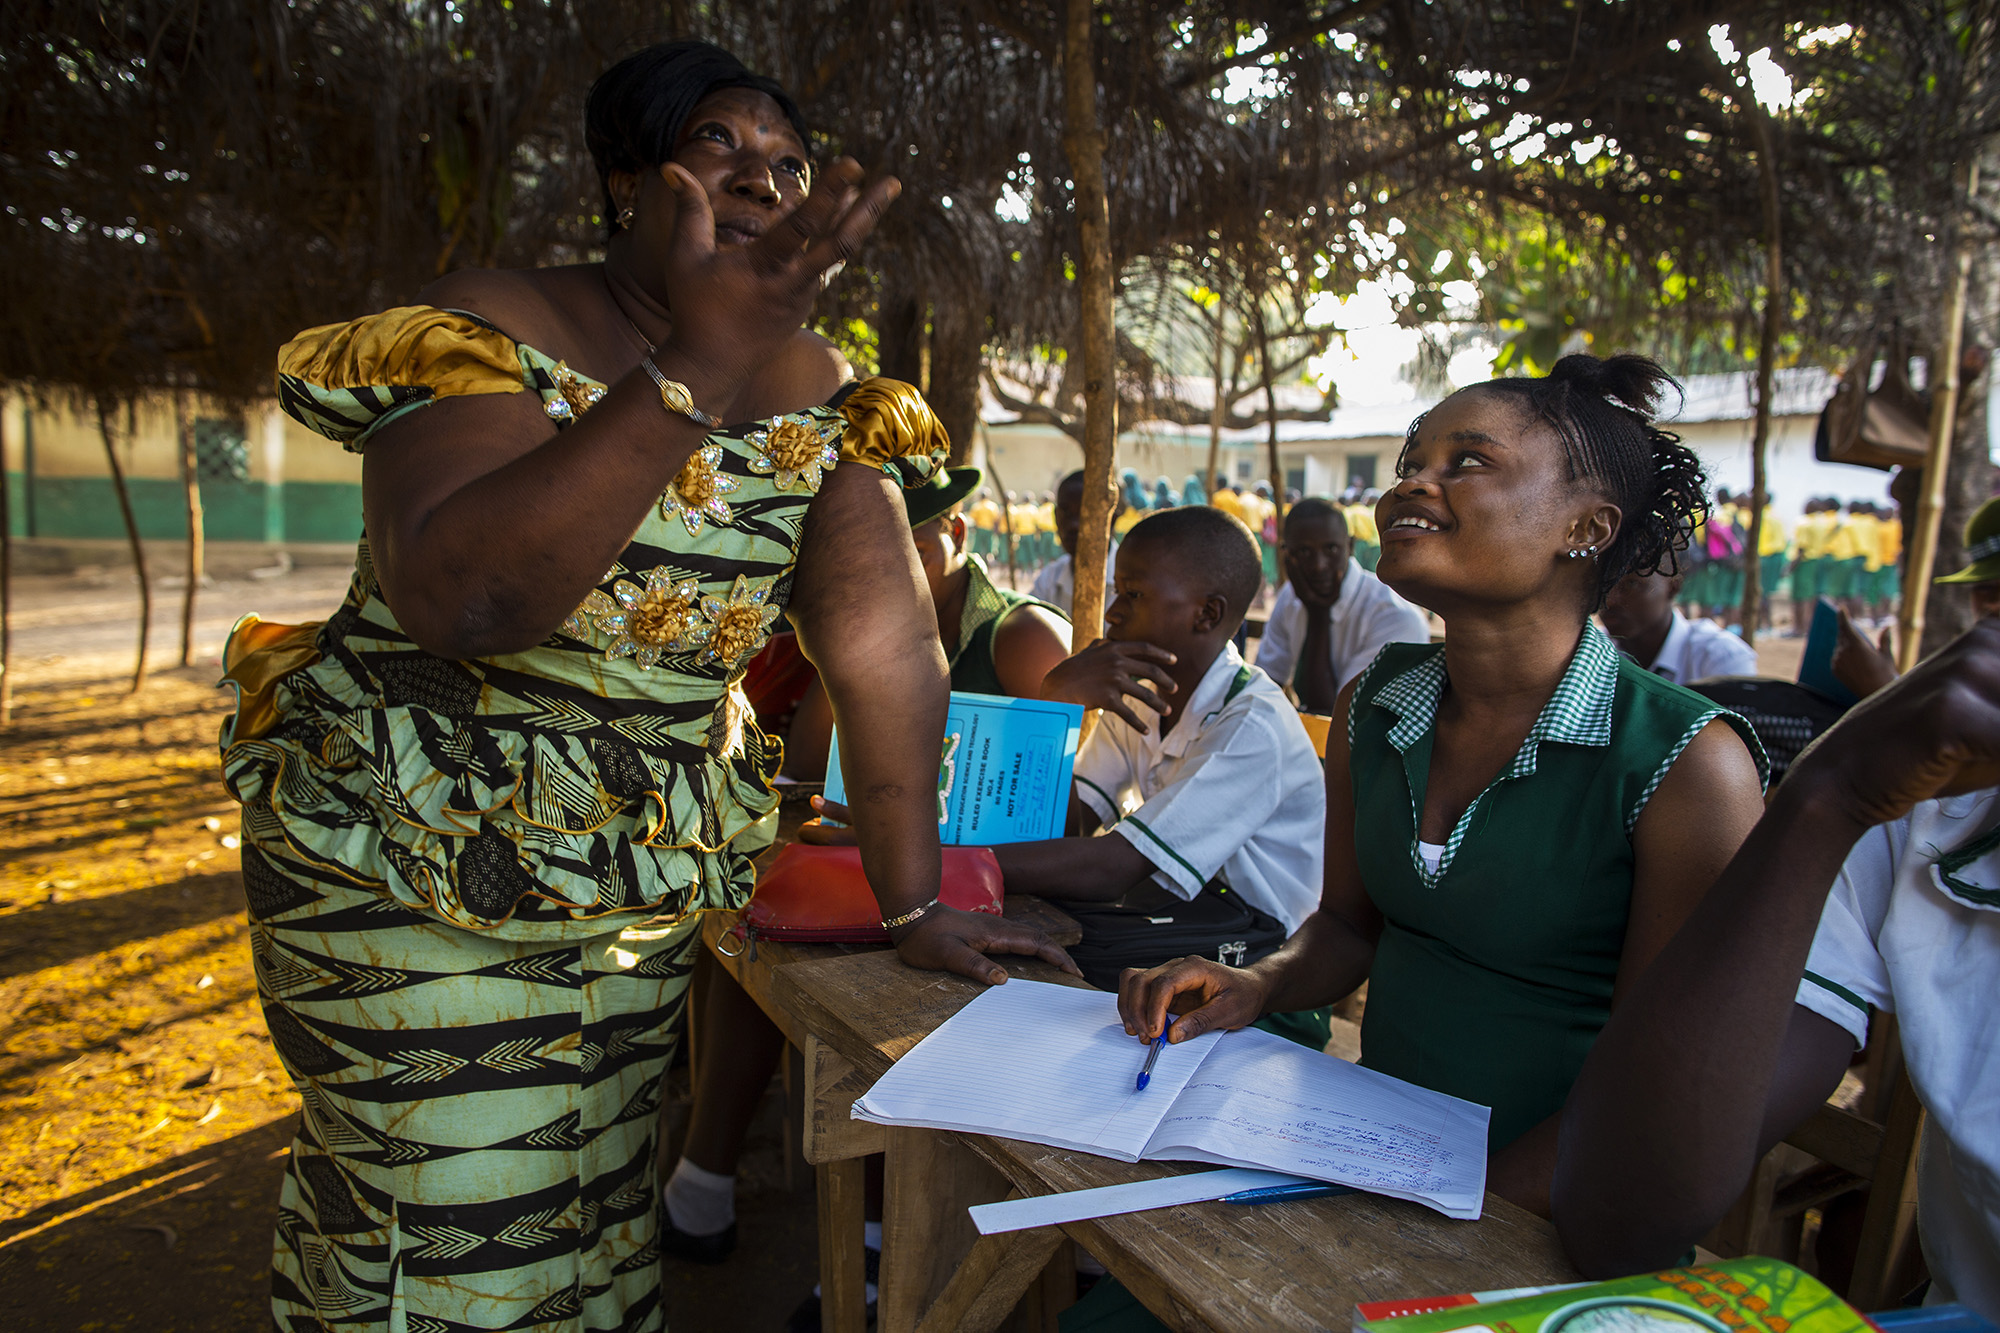  Mabinty Kubra Turay, left, Manager of Kubra Agricultural Secondary School, talks with Mariatu Bangura, 18, of Rokupr, before class begins. Mabinty helped Mariatu return to regular school after she attended the remedial school following the birth of 